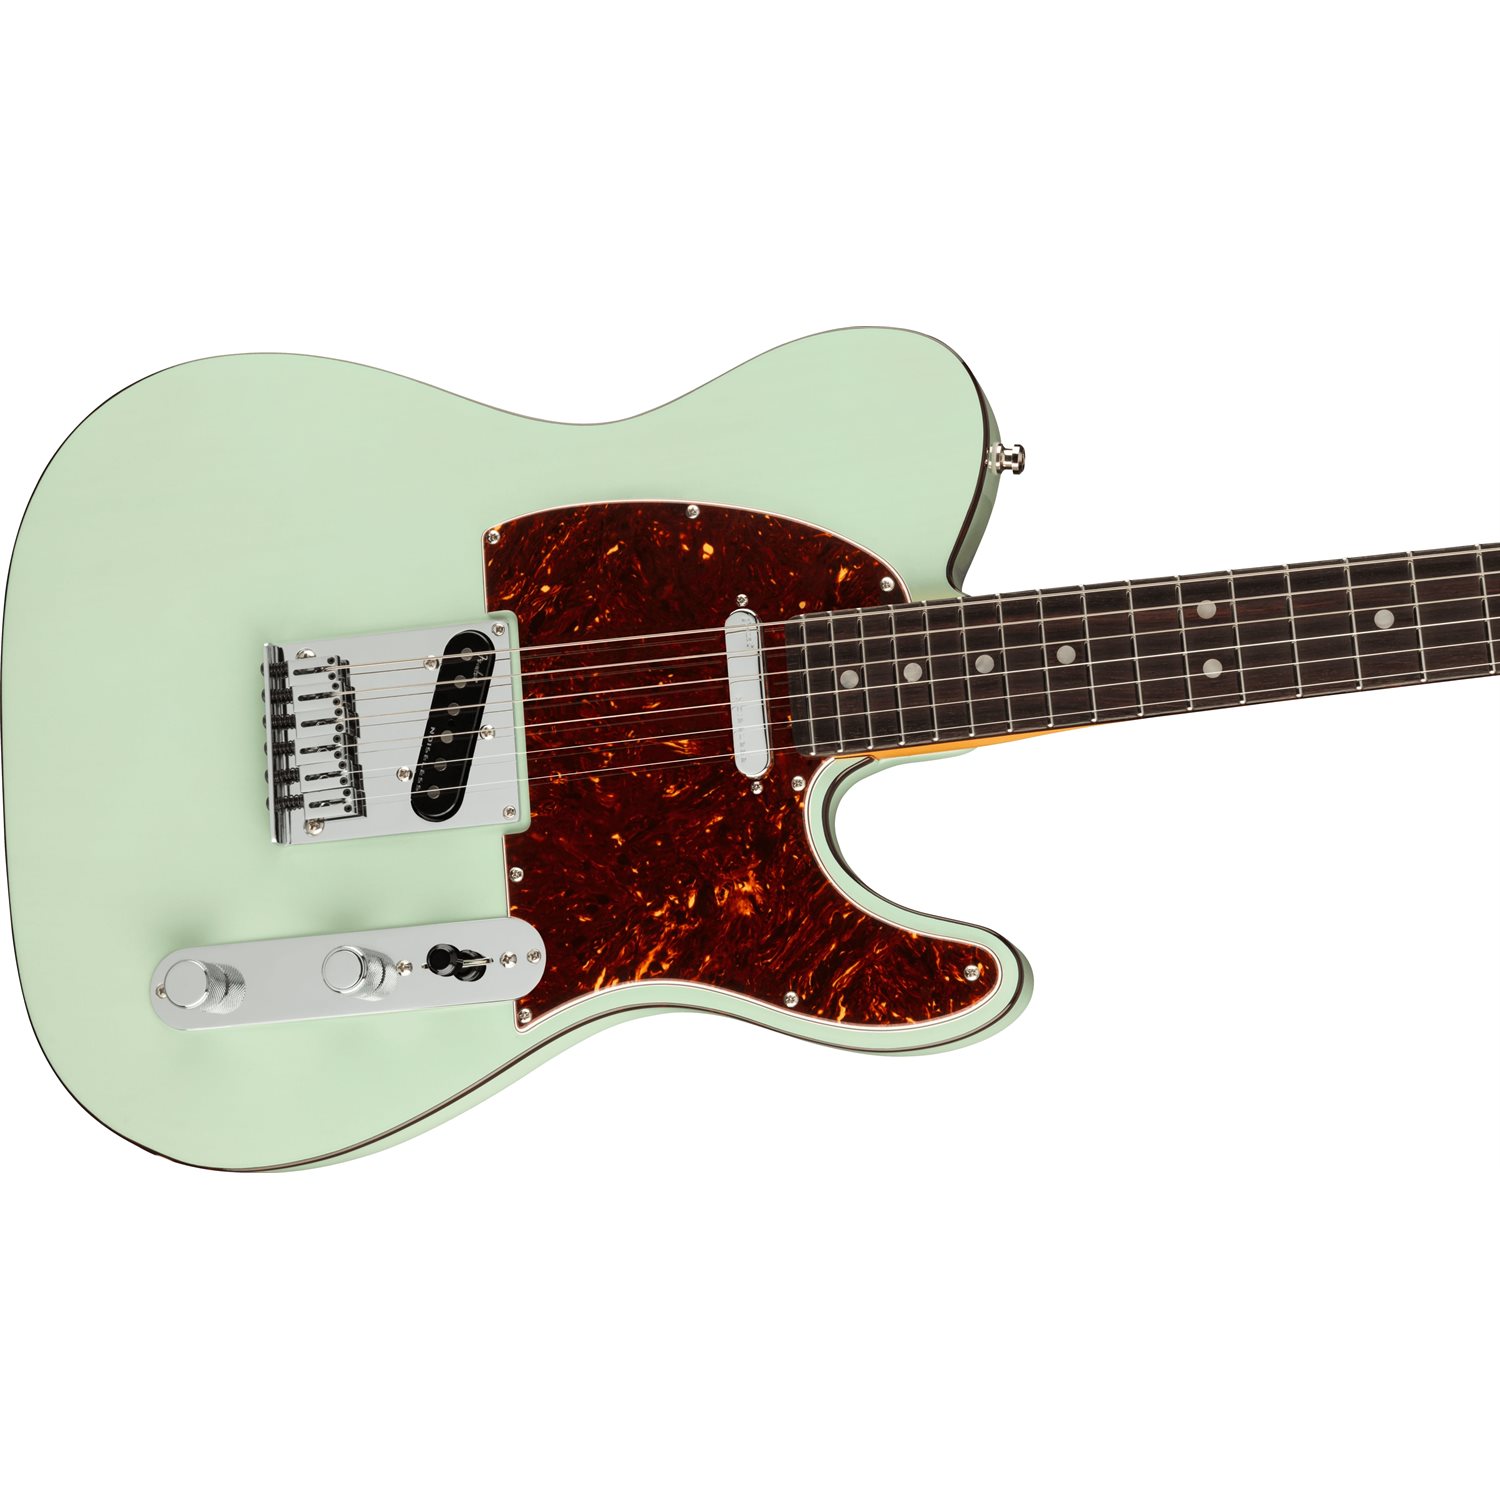 FENDER - AMERICAN ULTRA LUXE TELECASTER - Rosewood Fingerboard